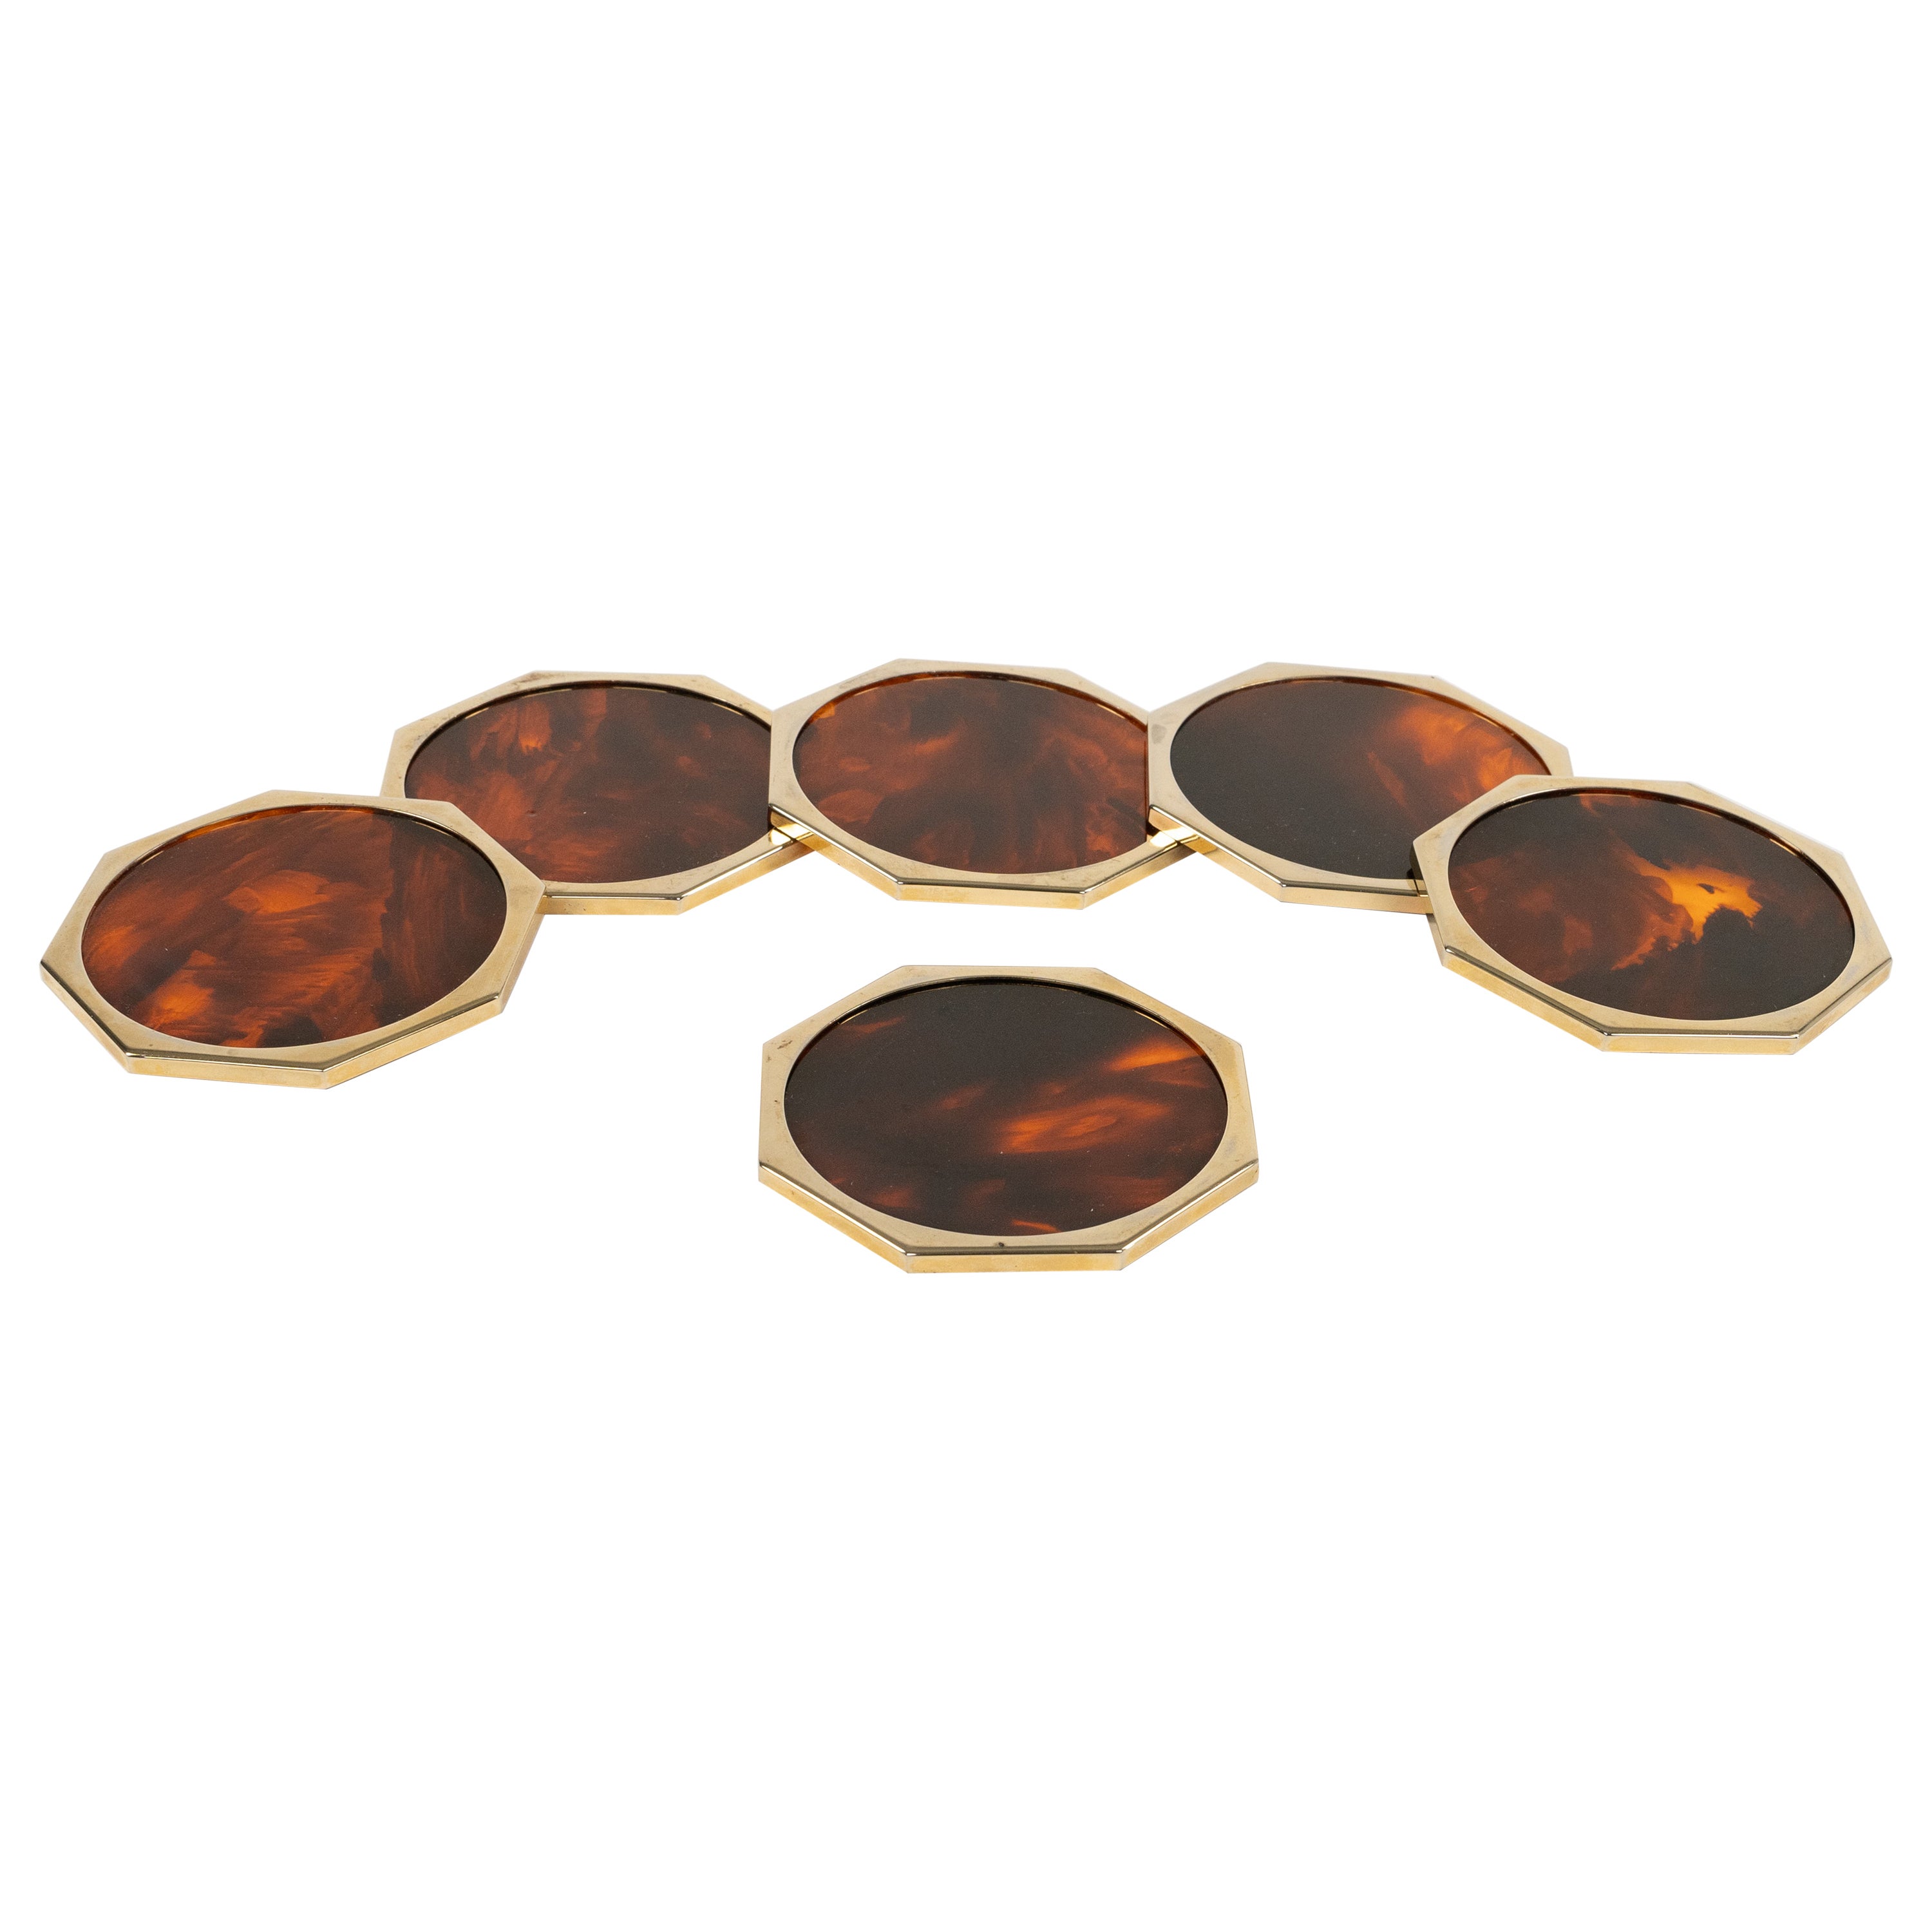 Christian Dior Set of Six Coasters Lucite Faux Tortoiseshell & Brass, Italy 1970 For Sale